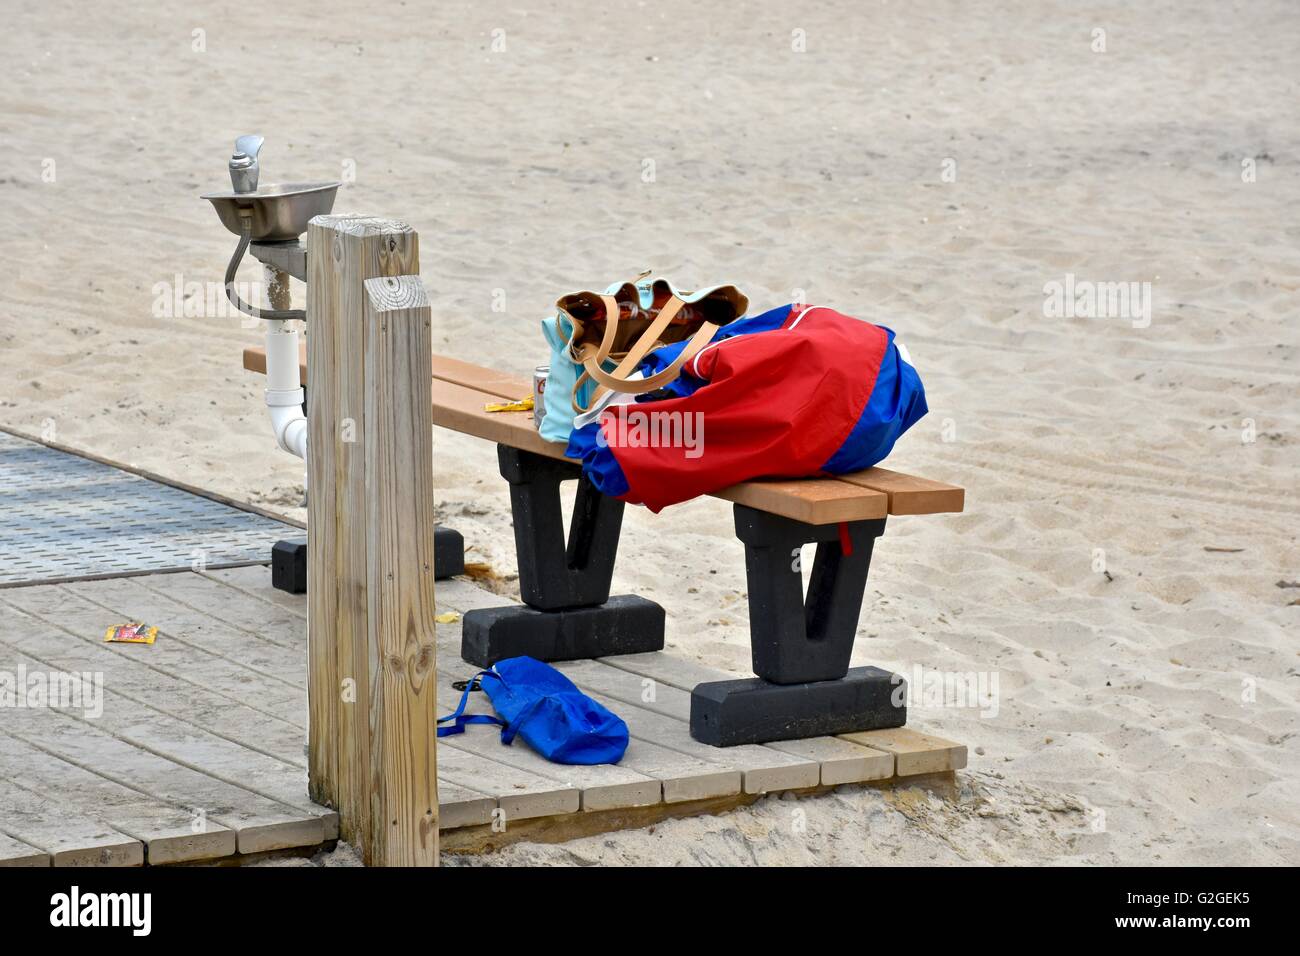 Articles of clothing and personal belongings left on a bench next to a water fountain at the beach at Assateague island Stock Photo